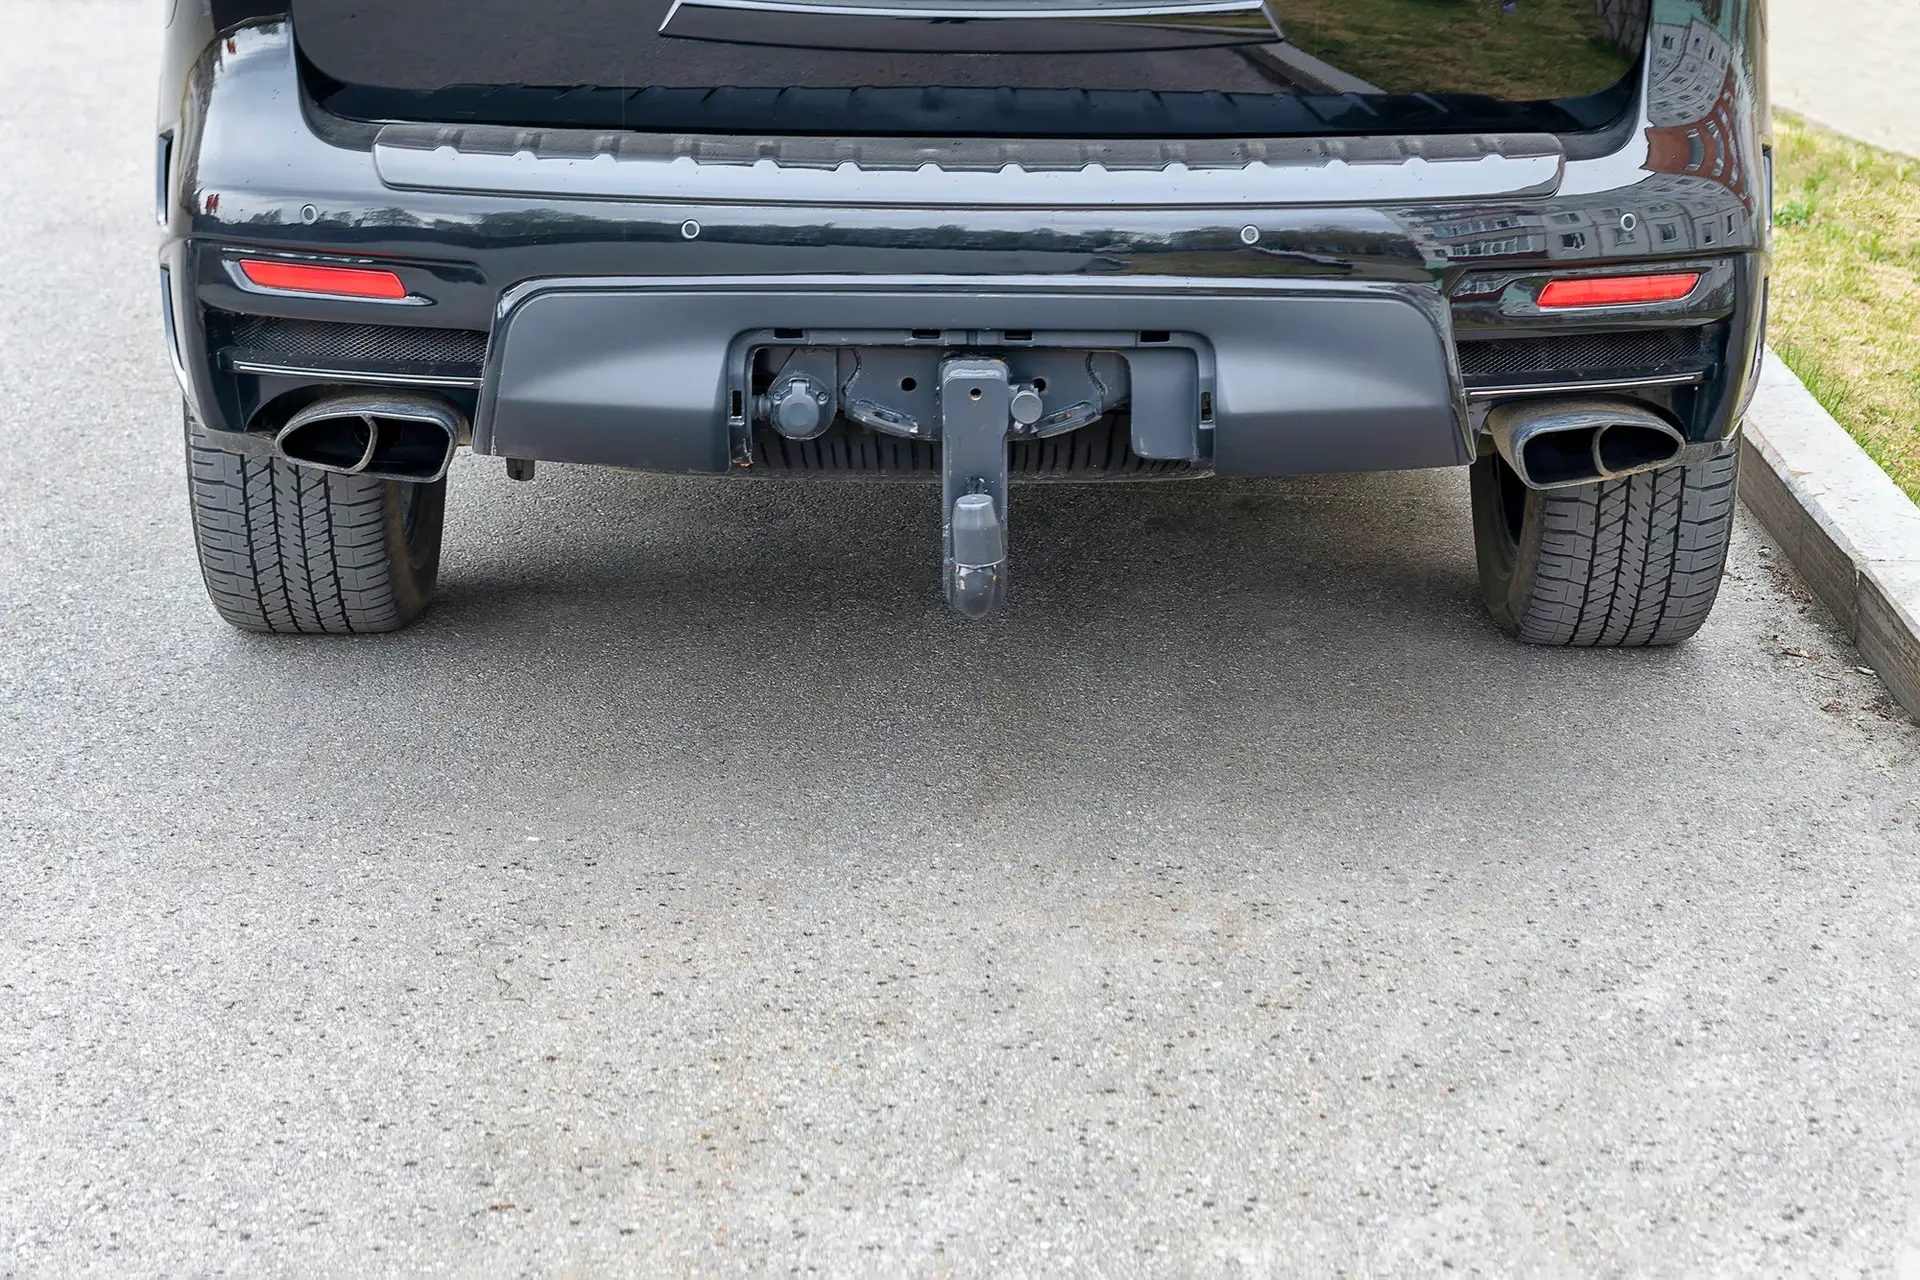 How To Use a Tow Bar: Different Ways of Towing a Car Tow hitch for towing a trailer of SUV. Day, horisontalshot Front view